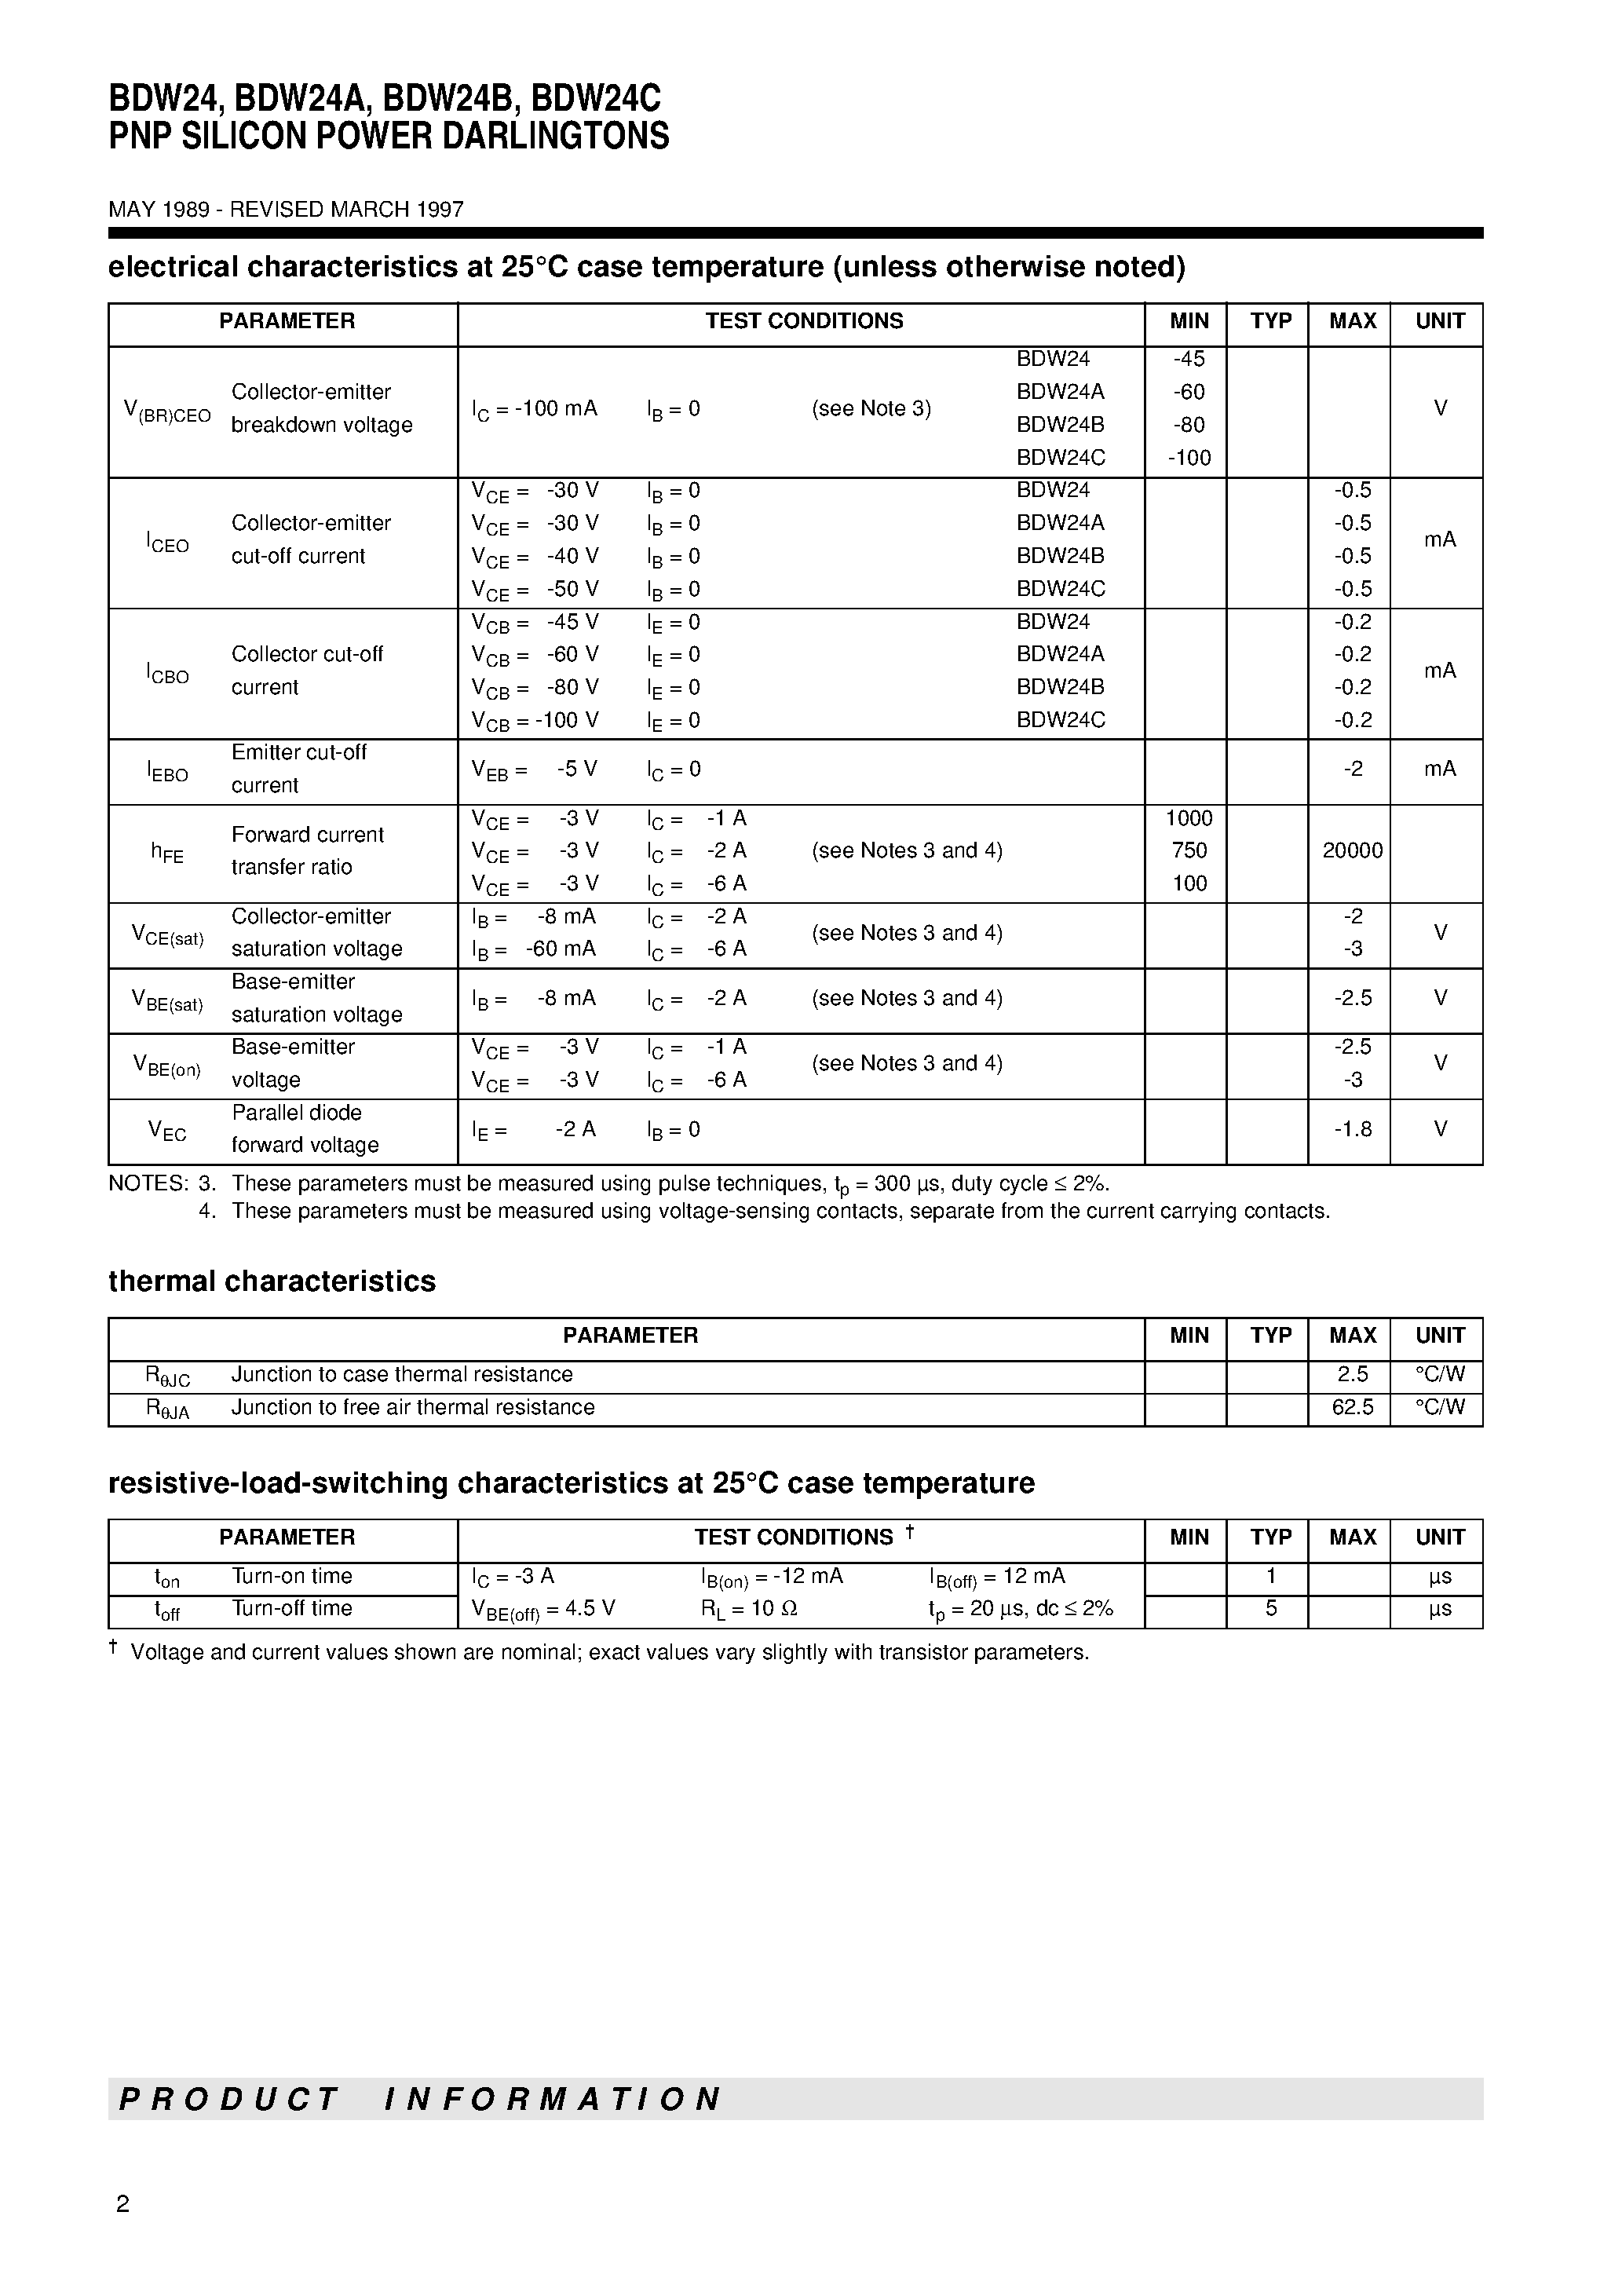 Datasheet BDW24A - PNP SILICON POWER DARLINGTONS page 2